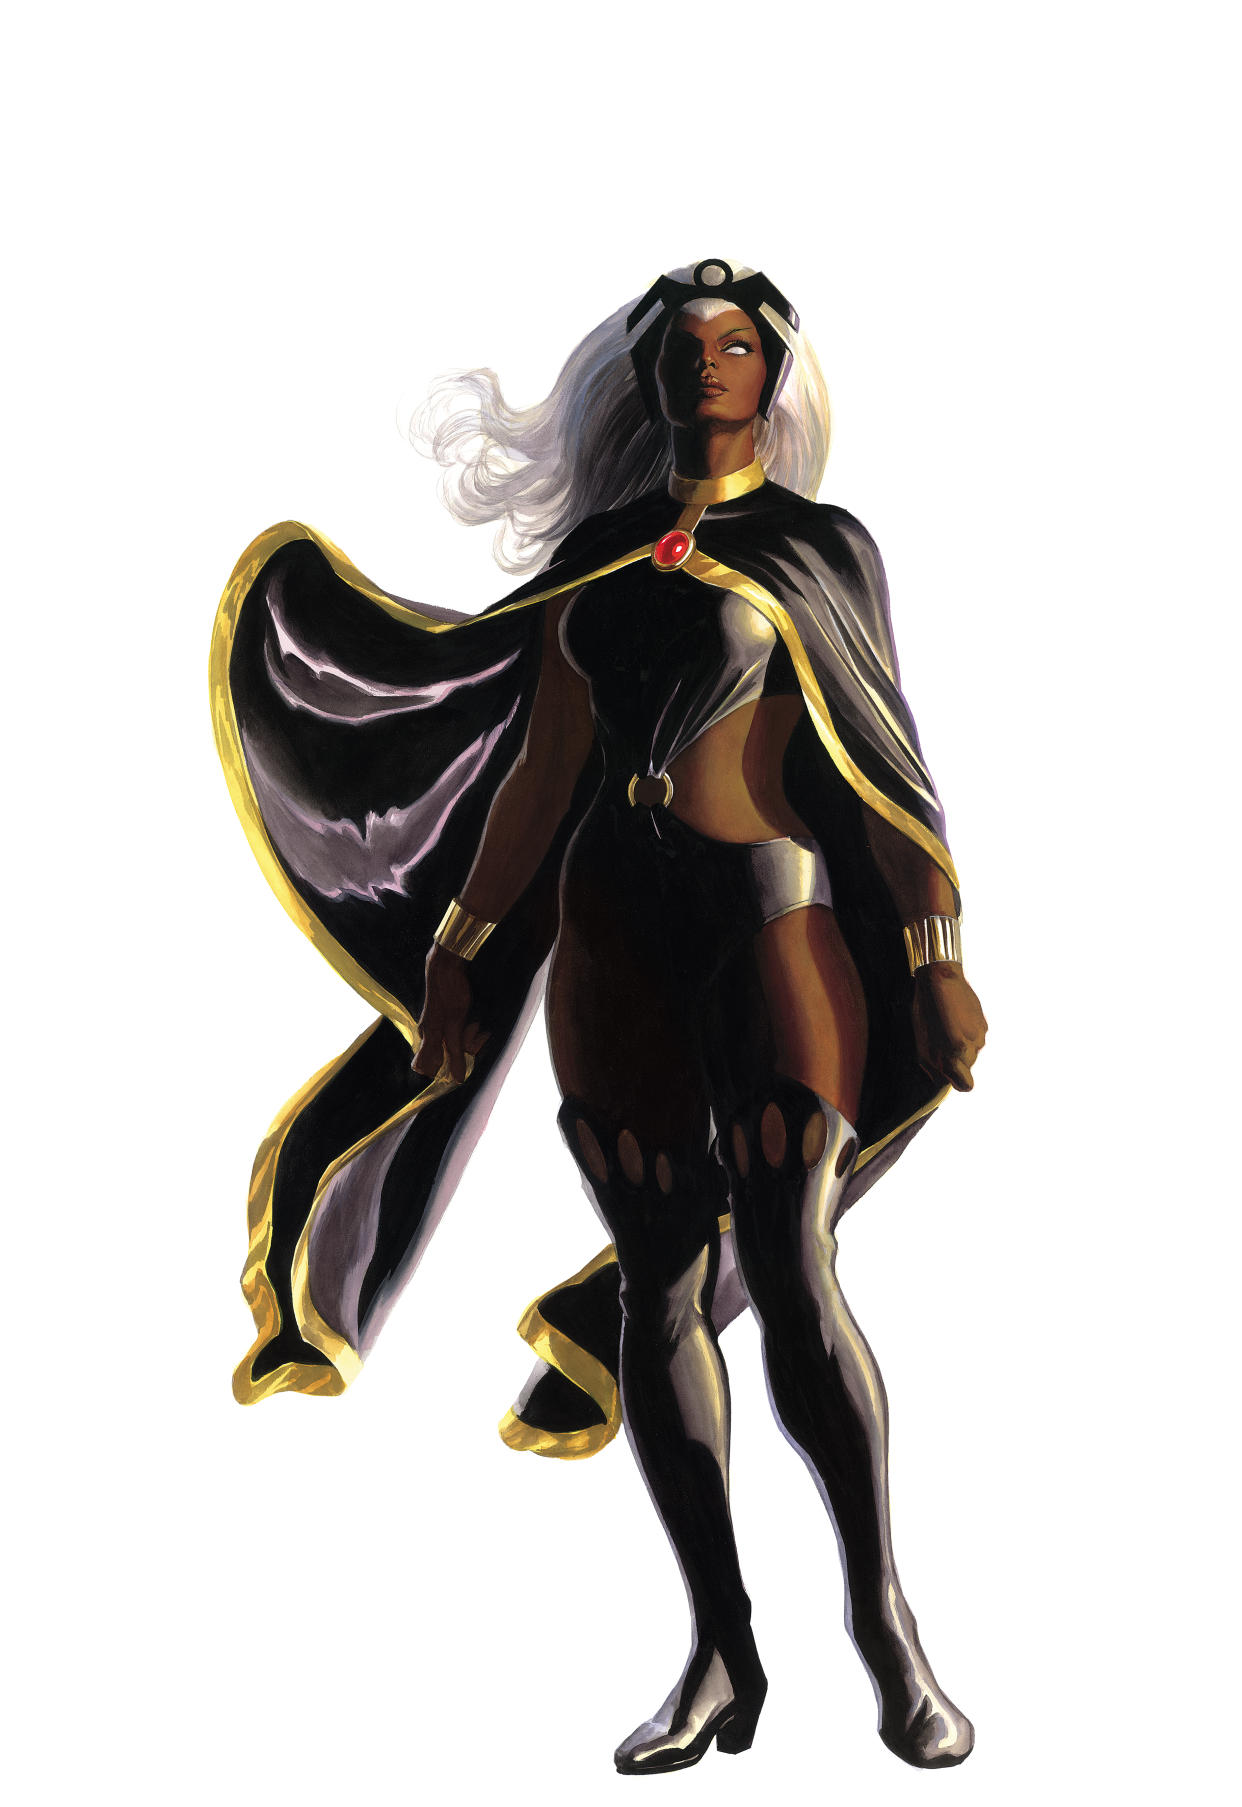 Storm as drawn by Alex Ross in the 